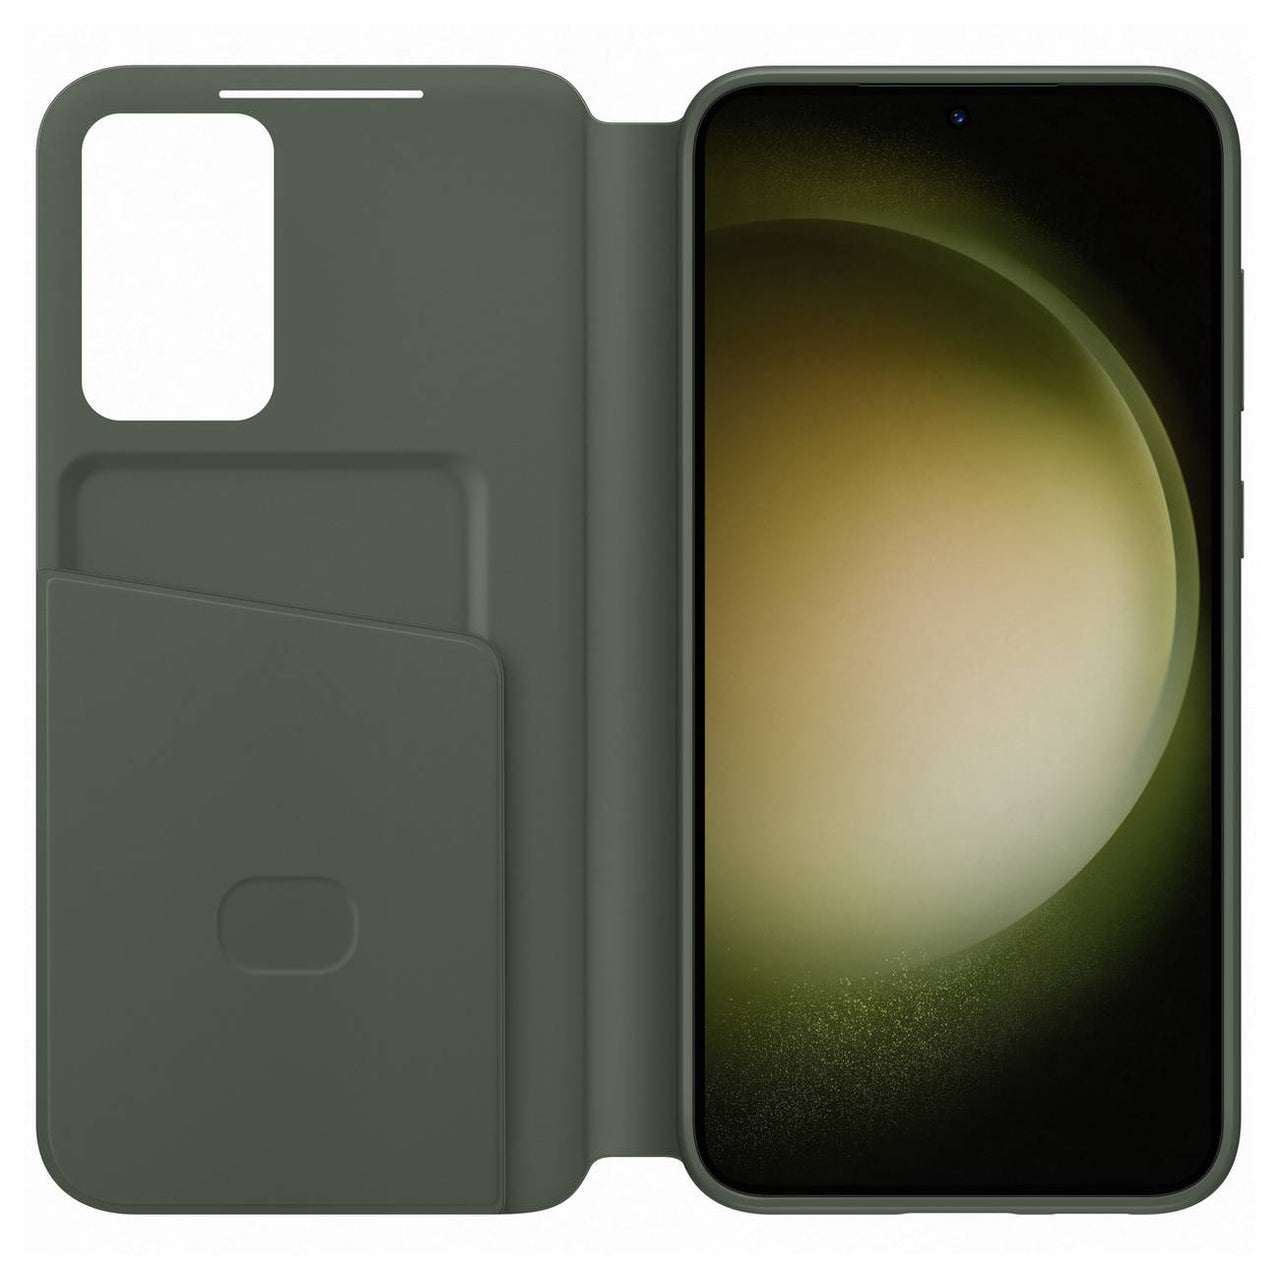 Samsung Clear View Wallet Case for Galaxy S23+ (S23Plus) - Khaki Green